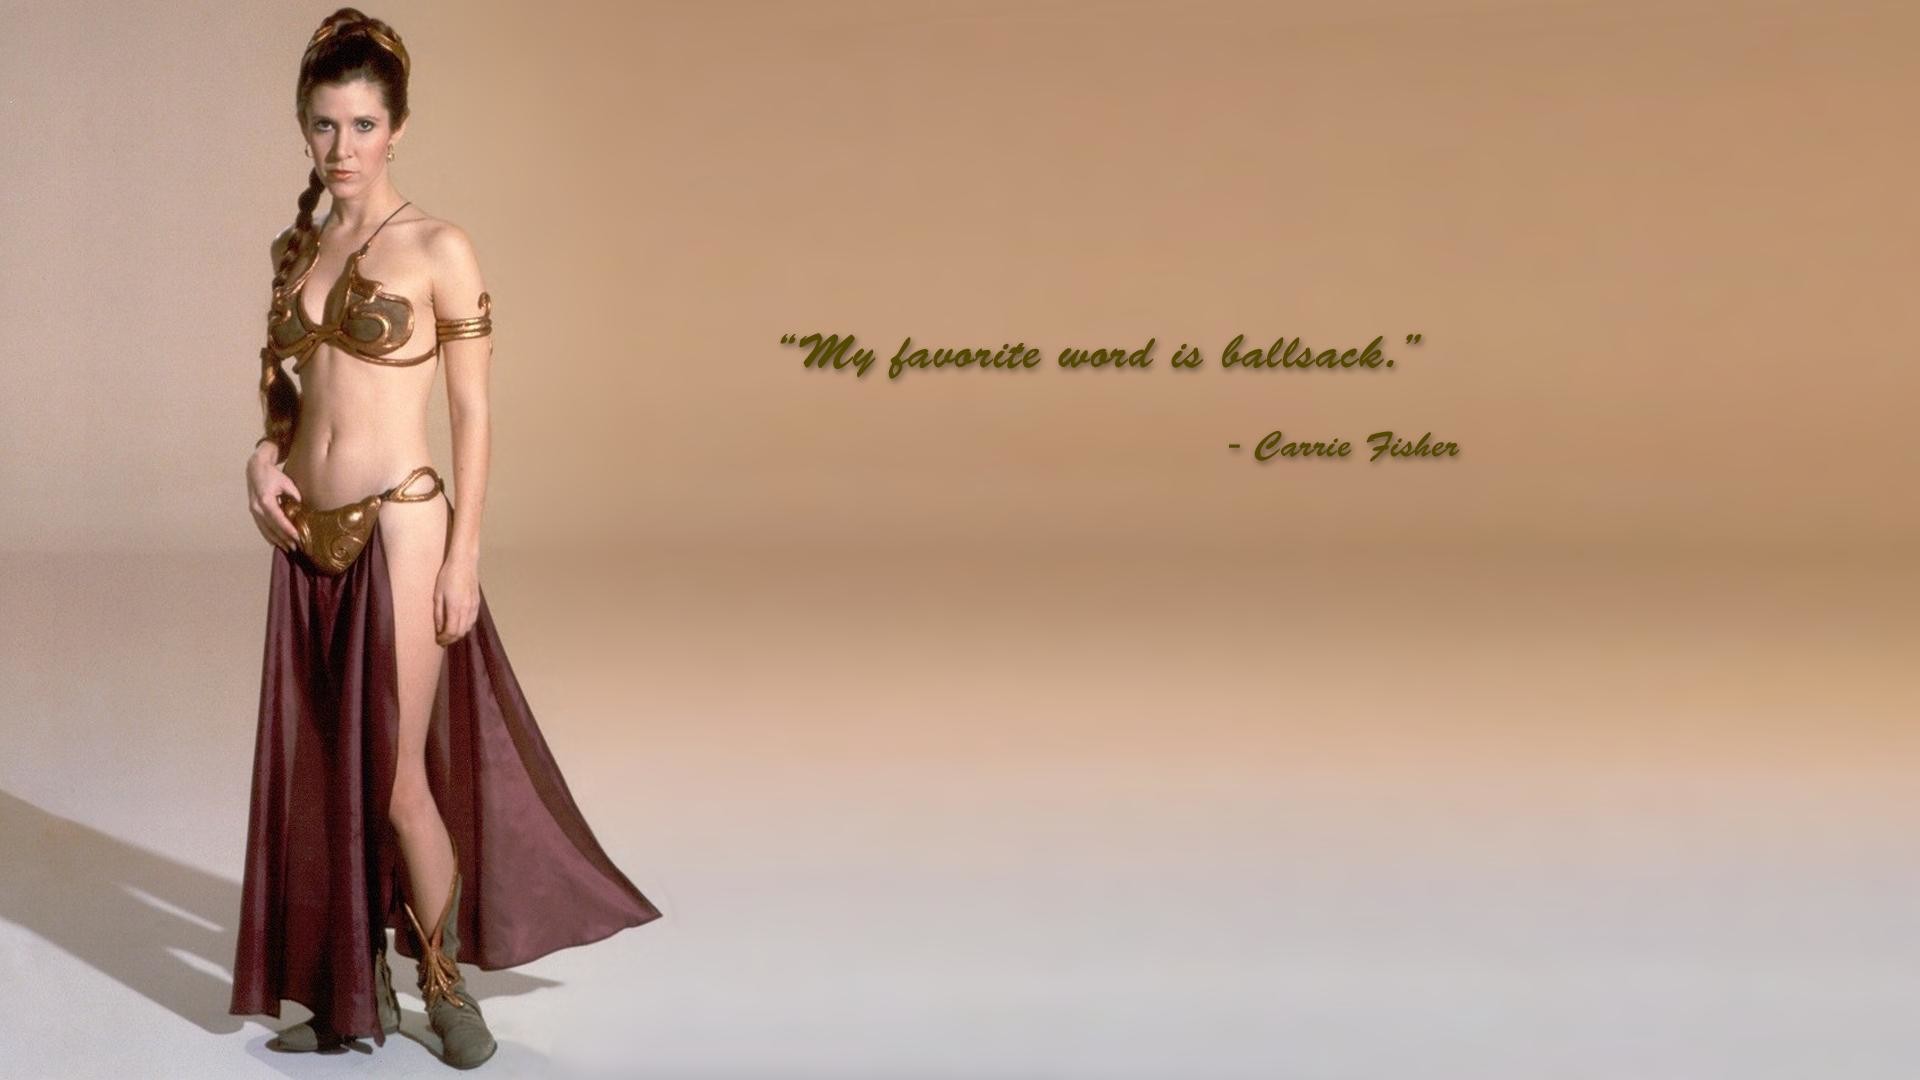 This Subreddit Needs More Authentic Quotes Carrie Fisher Ladies And Gentlemen 1920x1080